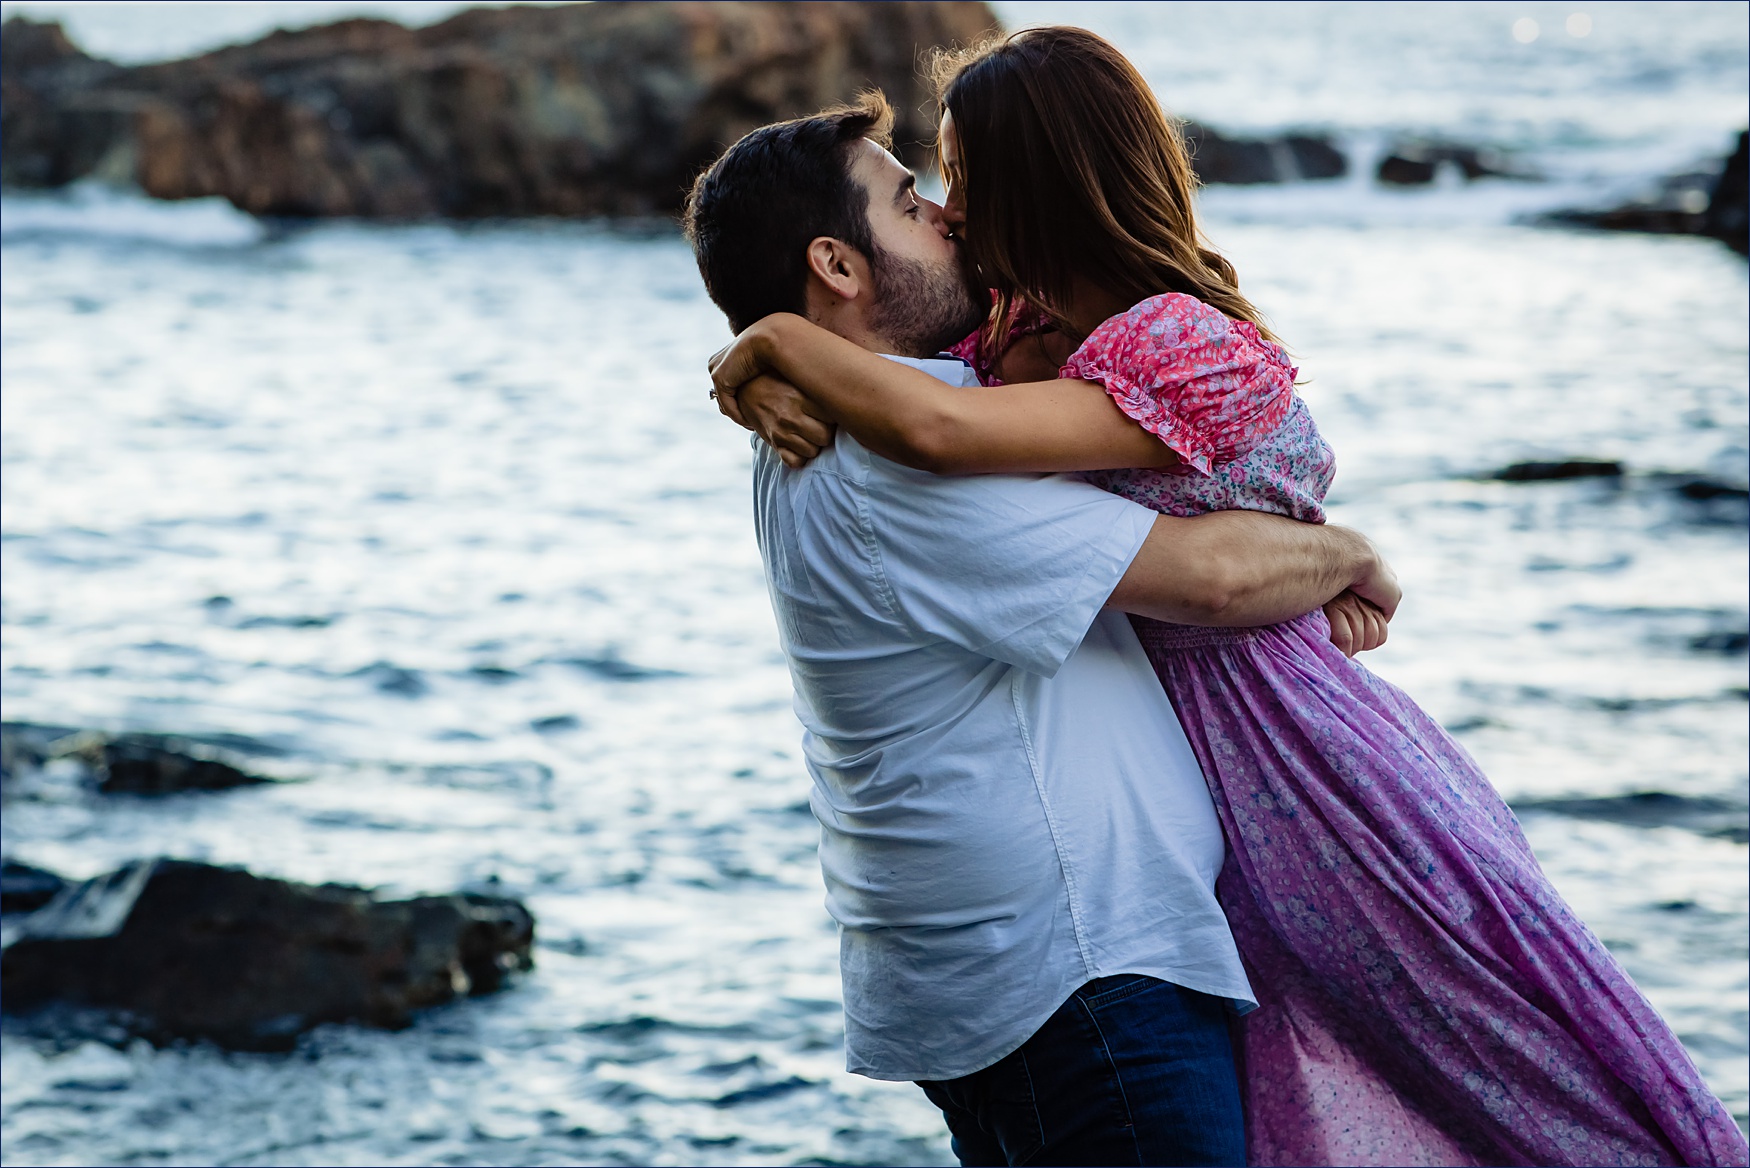 The couple kisses in front of the deep blue ocean water in Ogunquit